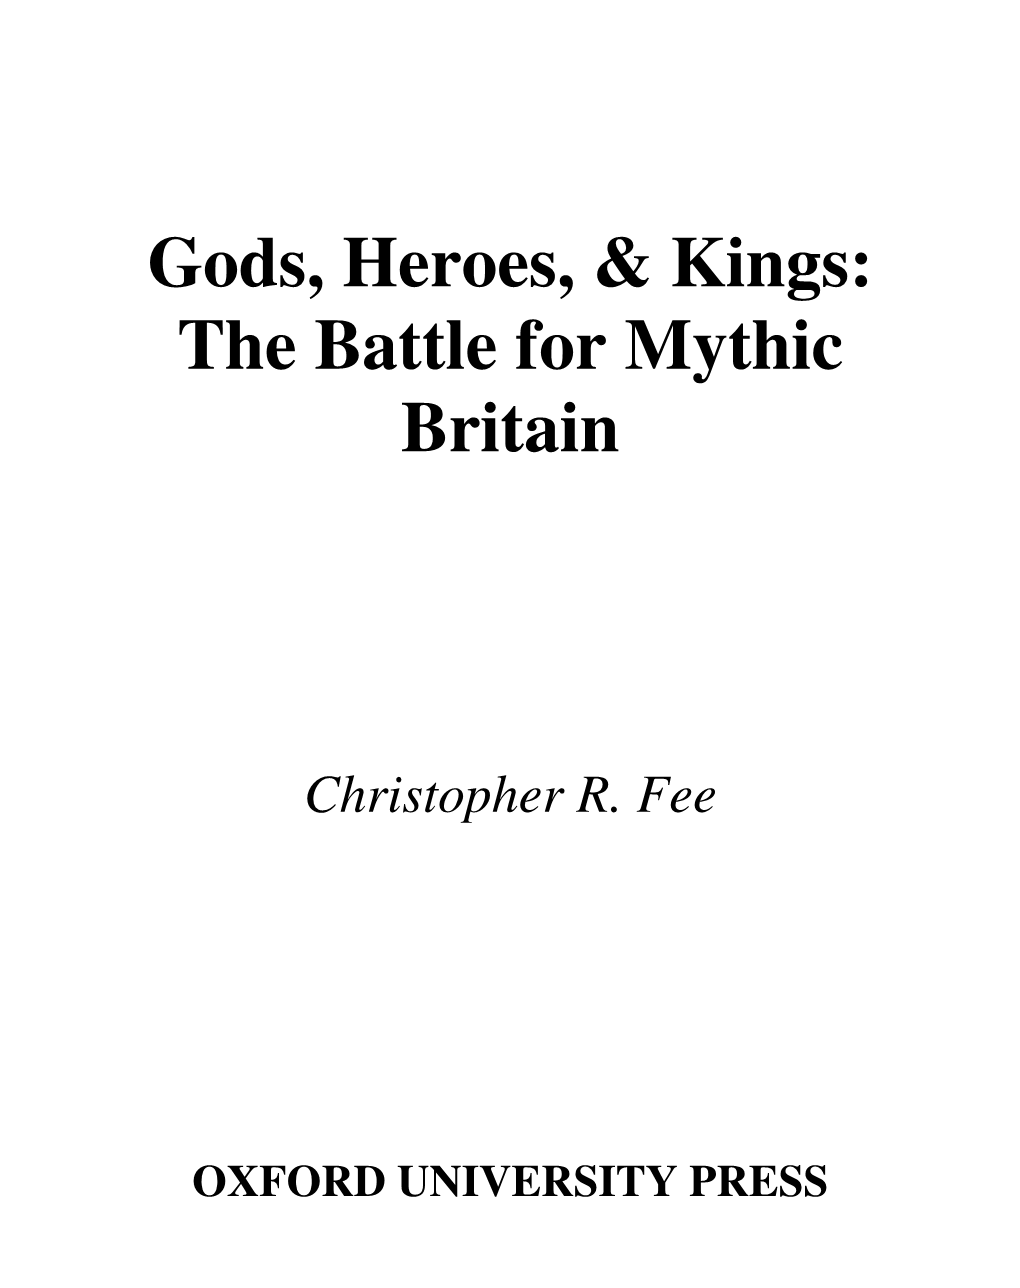 Gods, Heroes, & Kings: the Battle for Mythic Britain